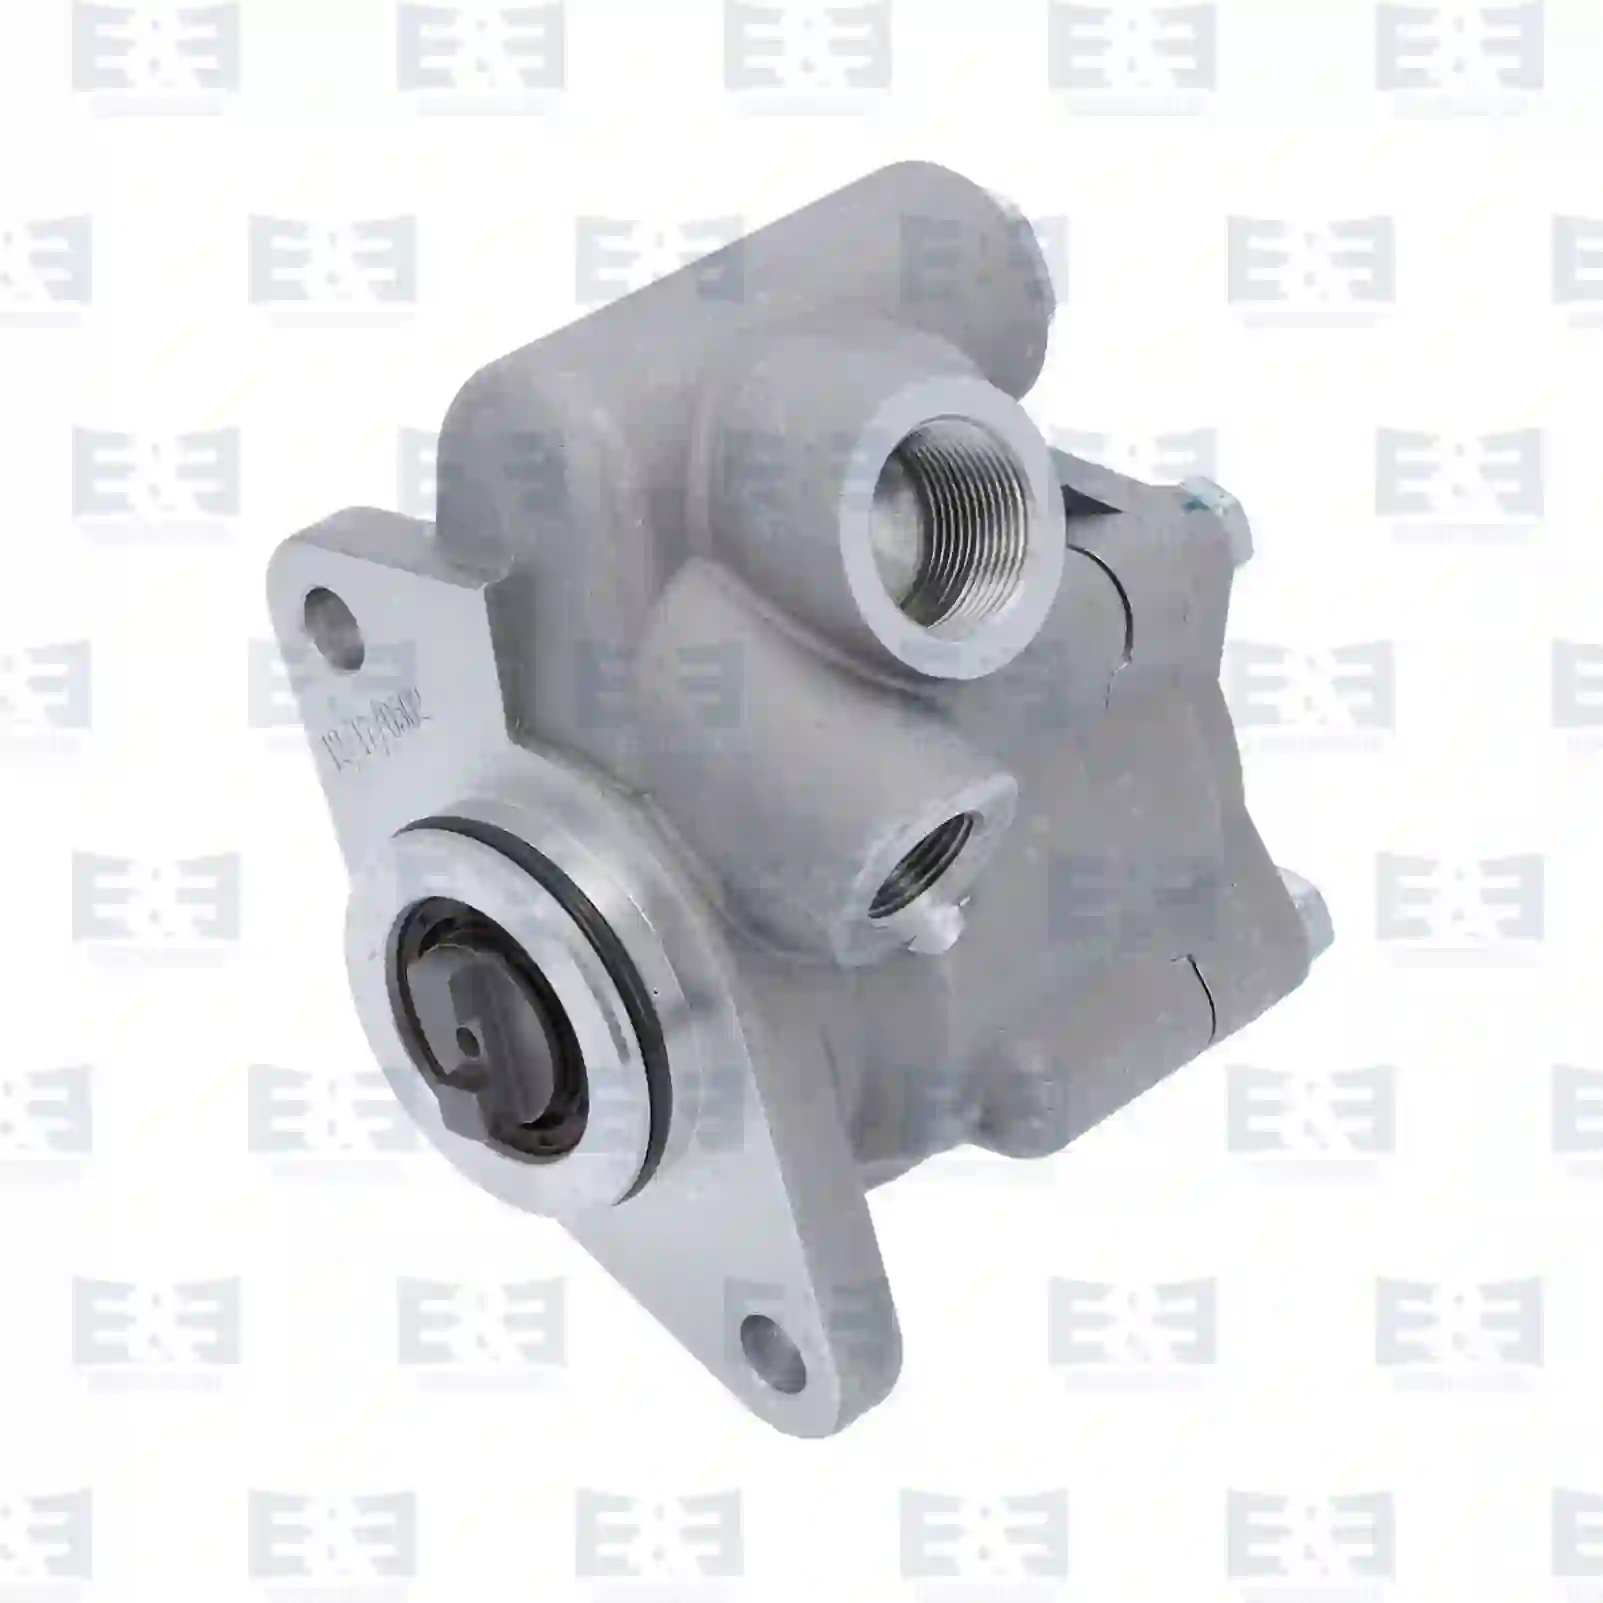 Steering Pump Servo pump, right turn, EE No 2E2205800 ,  oem no:7722990144, 81471016122, 81471016137, 81471016162, 81471019122, 81471019137, 81471019162, N1011005183, N1015000610, D0278455, 0044666401, 011005183, 012601200, 015000610, 679095, 920921245, ZG40612-0008 E&E Truck Spare Parts | Truck Spare Parts, Auotomotive Spare Parts